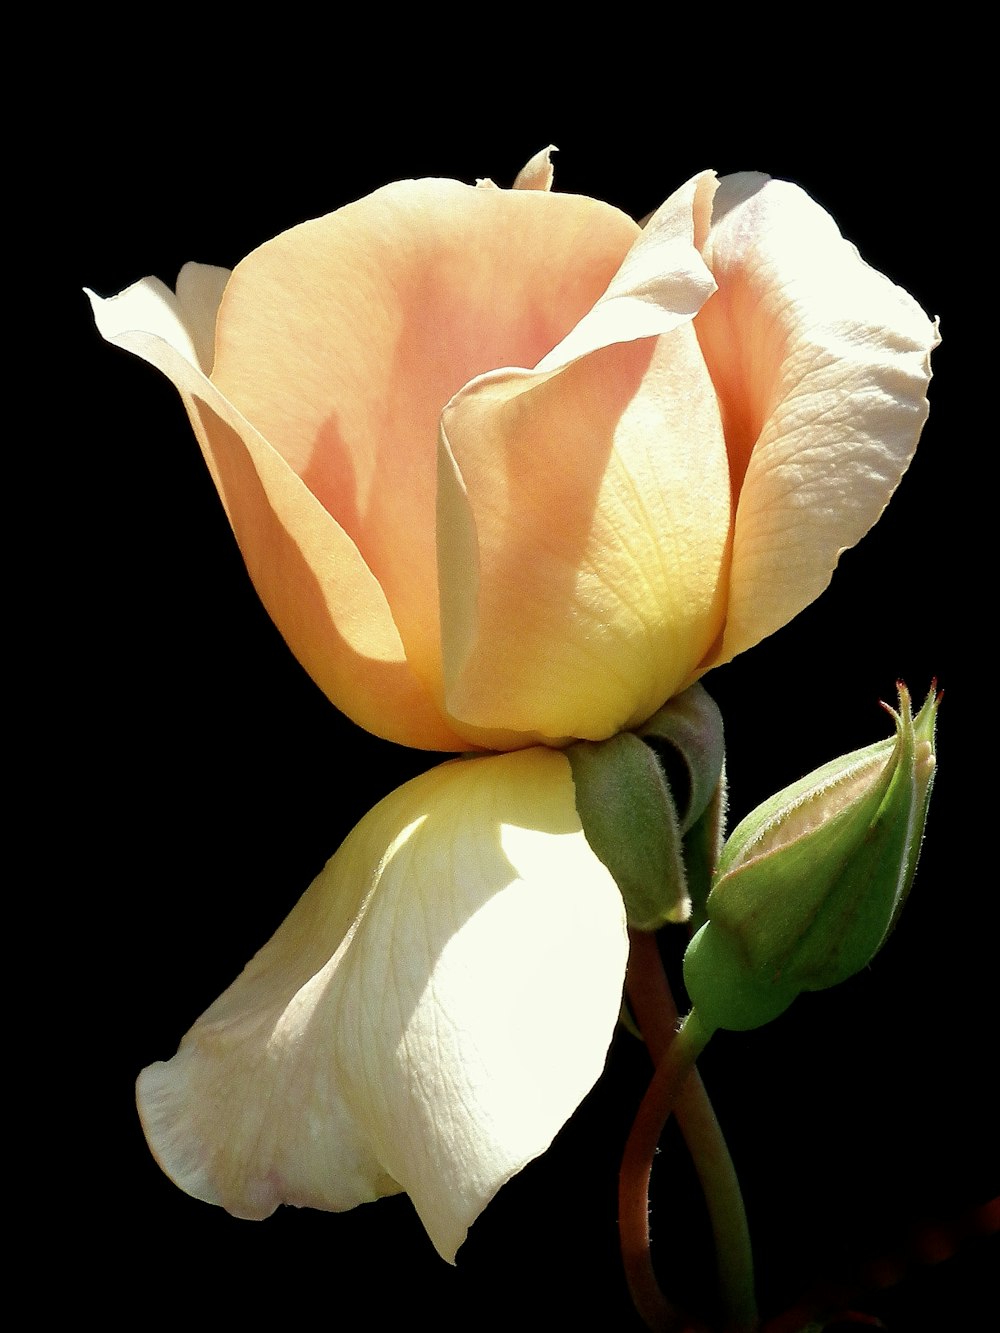 a single white rose with a black background